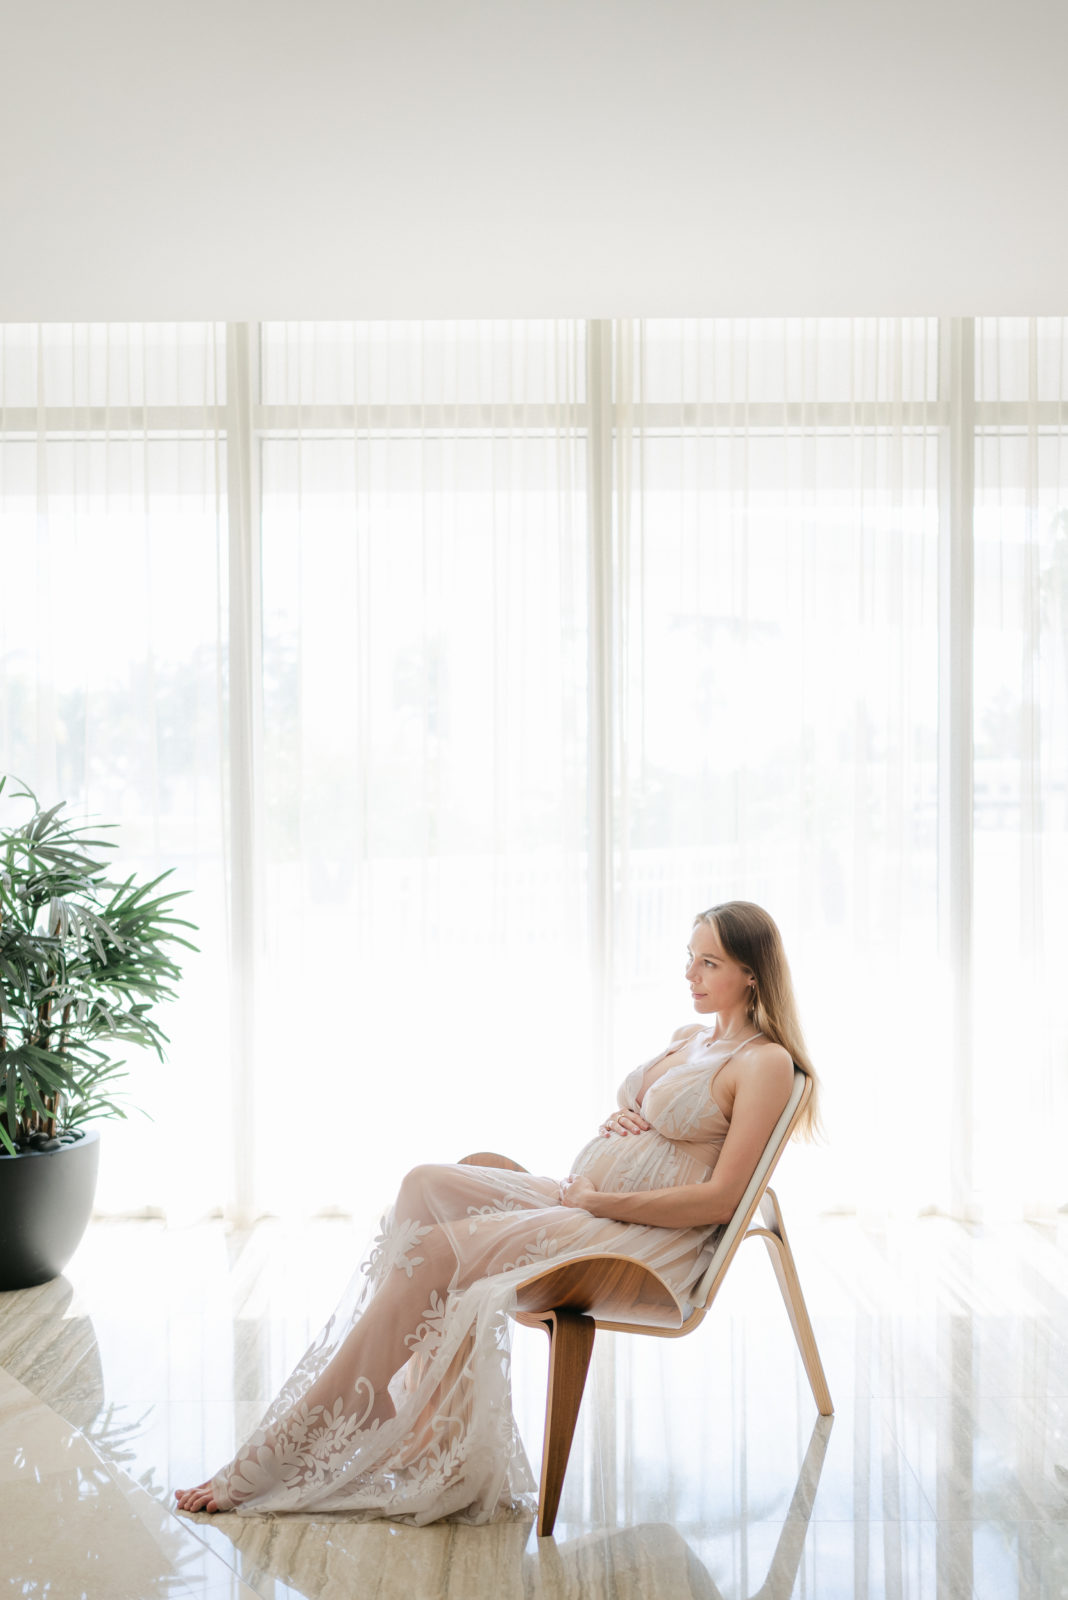 Magazine cover of a mom-to-be sitting on a chair holding baby bump